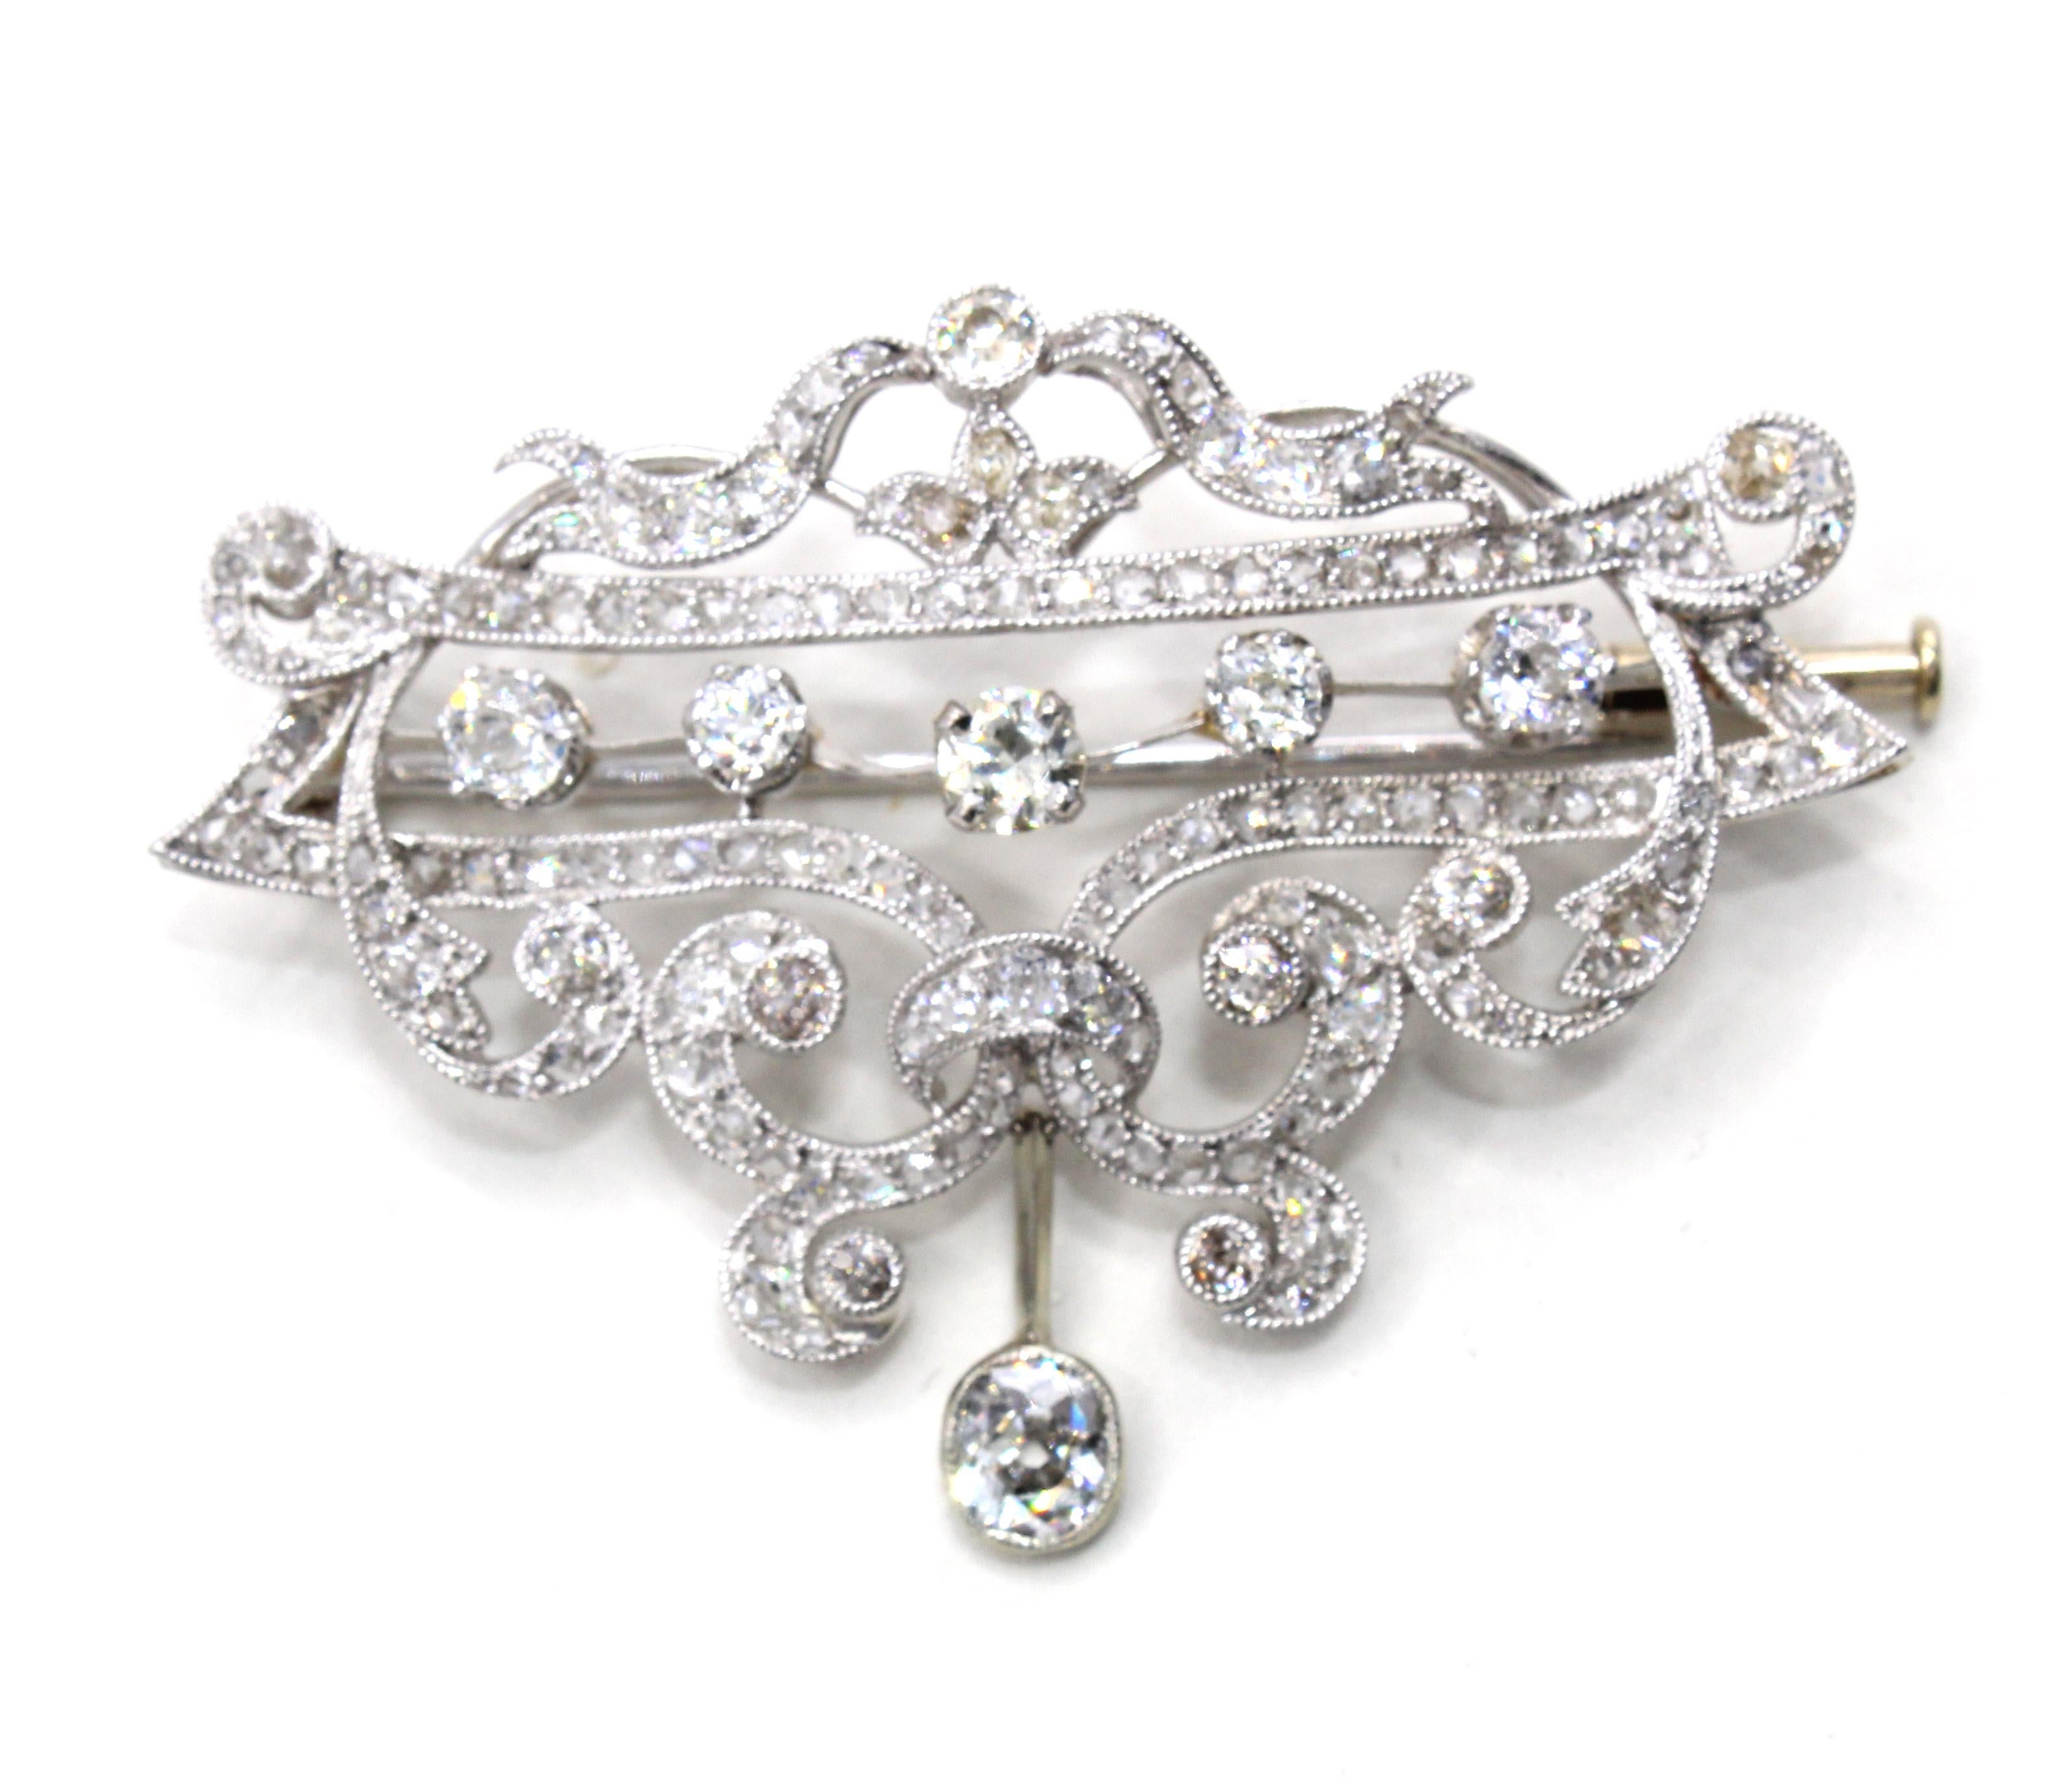 Beautifully designed and masterfully handcrafted, this Edwardian brooch from ca. 1910 exhibits the skilled techniques of a master jeweler. From wonderful ajour work to fine milligrain along the edges of all the channel settings to the curved and